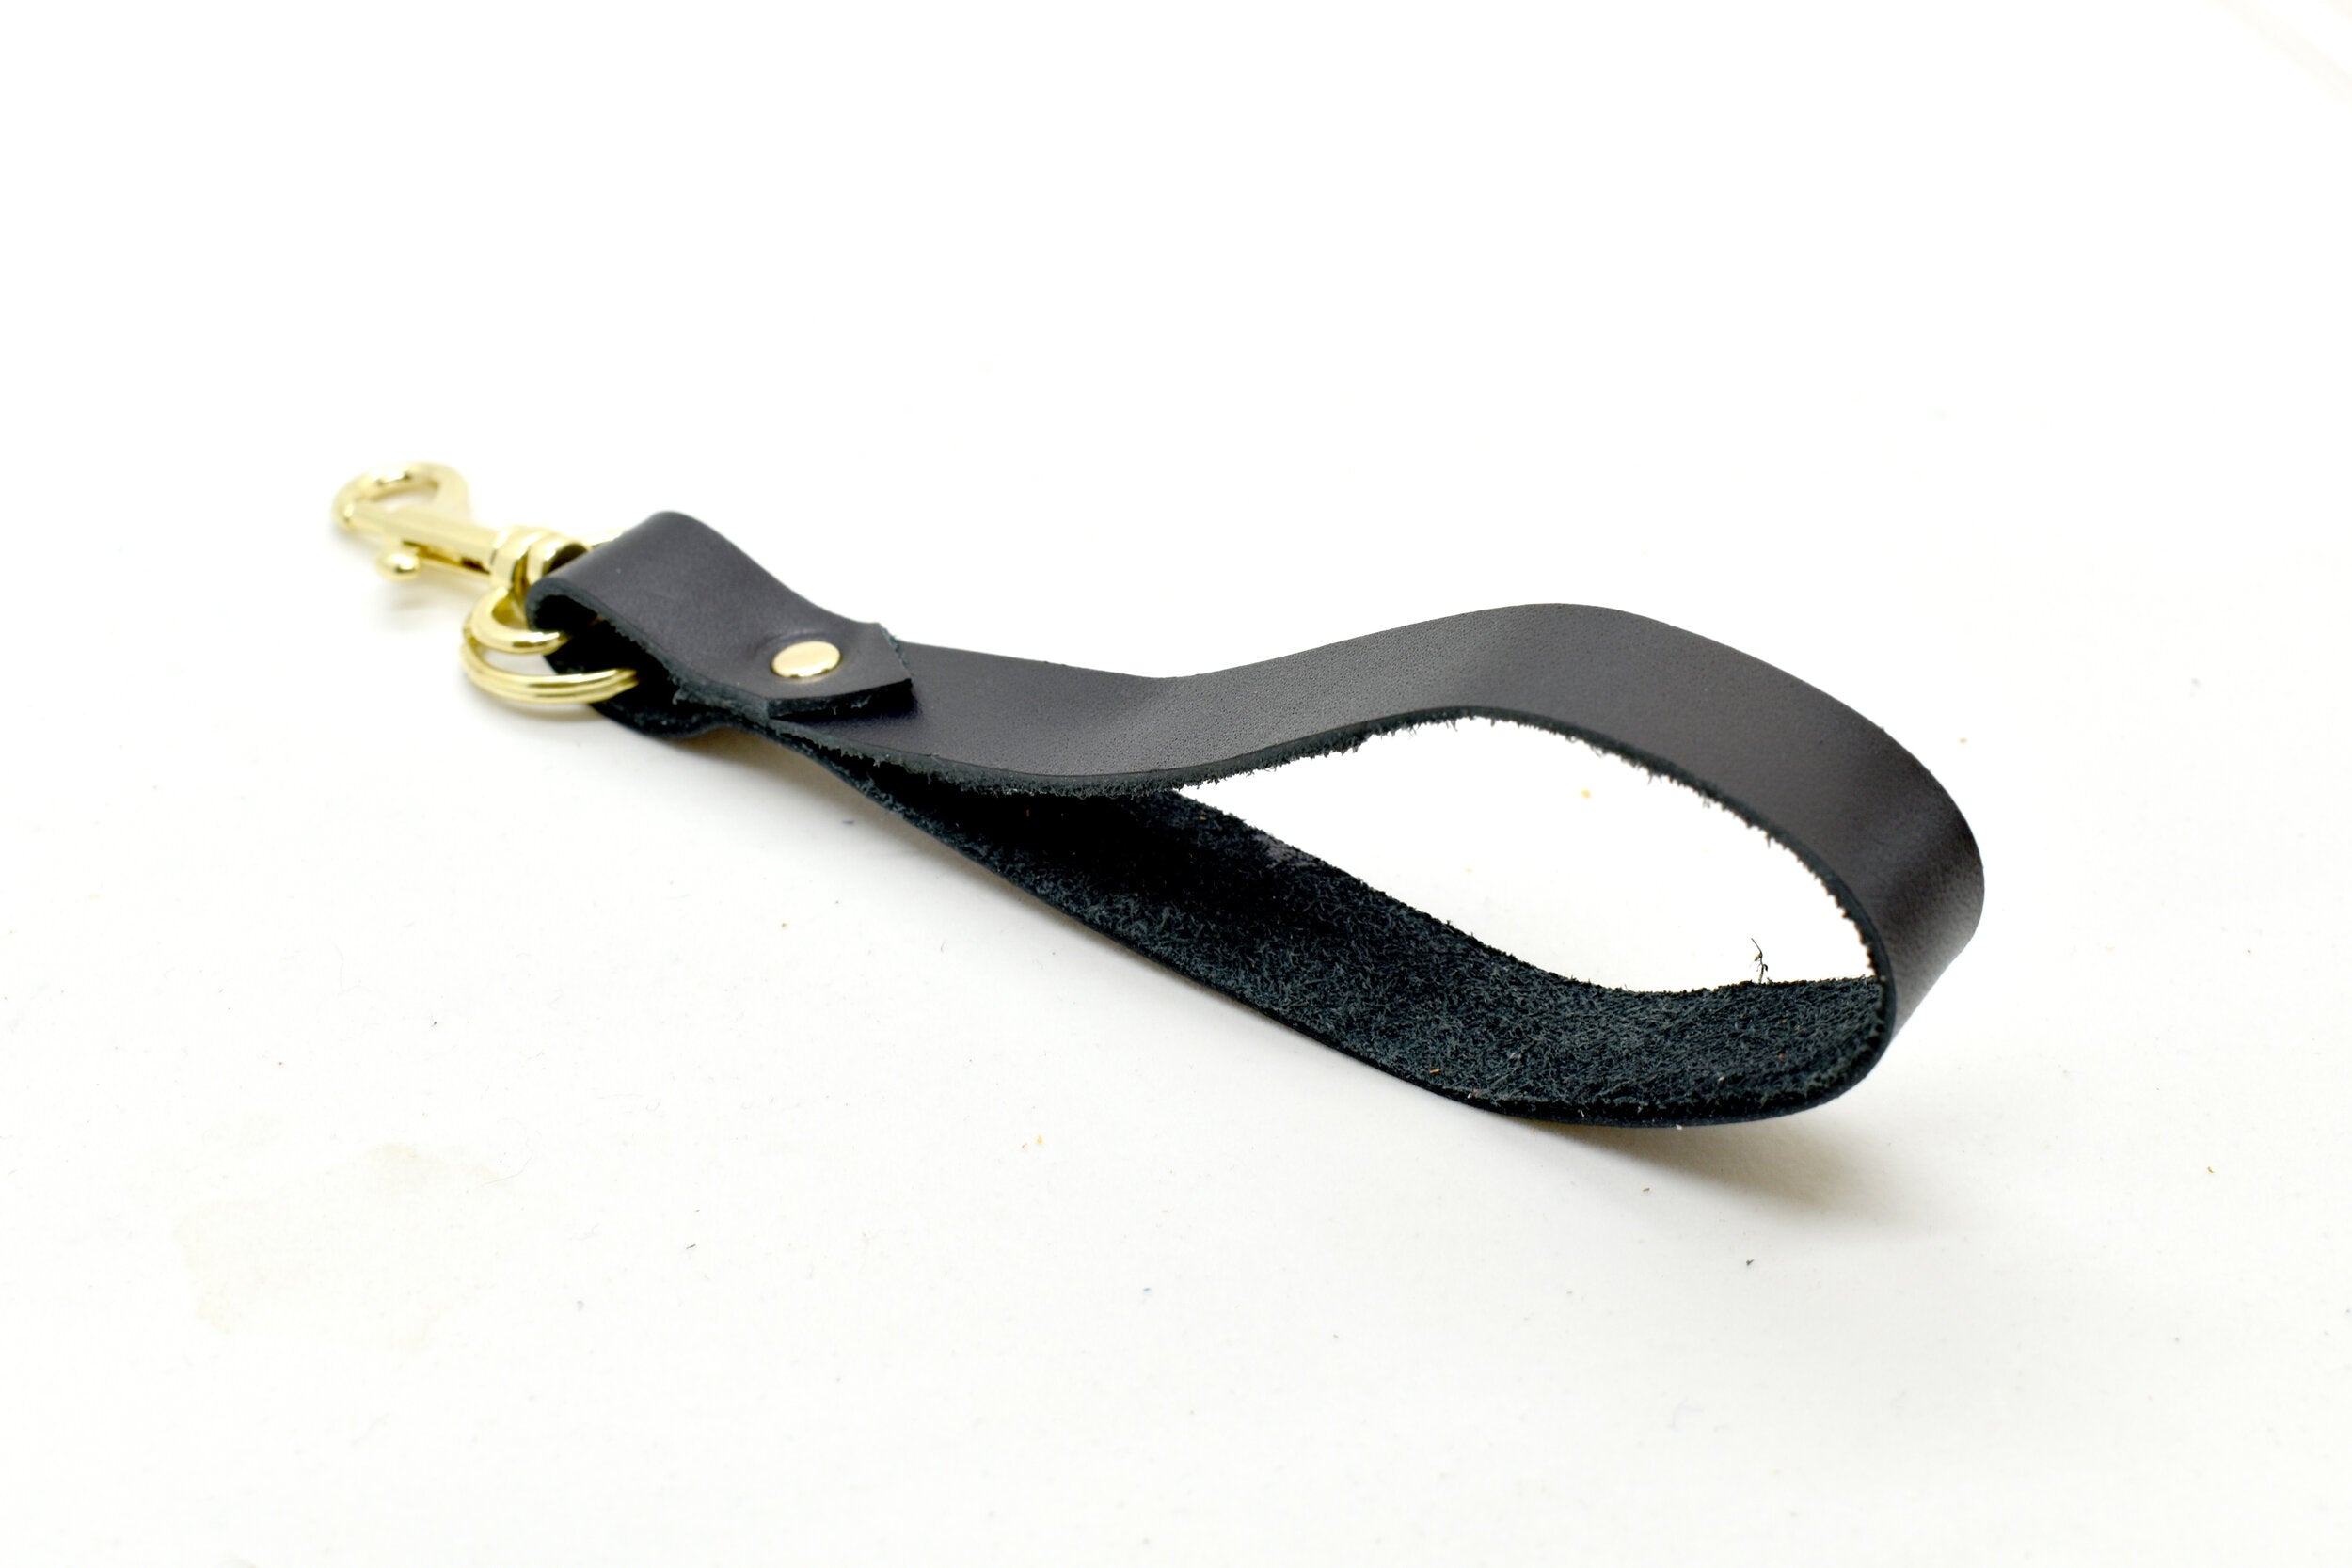 leather wristlet bag charm key chain for carrying keys in space black